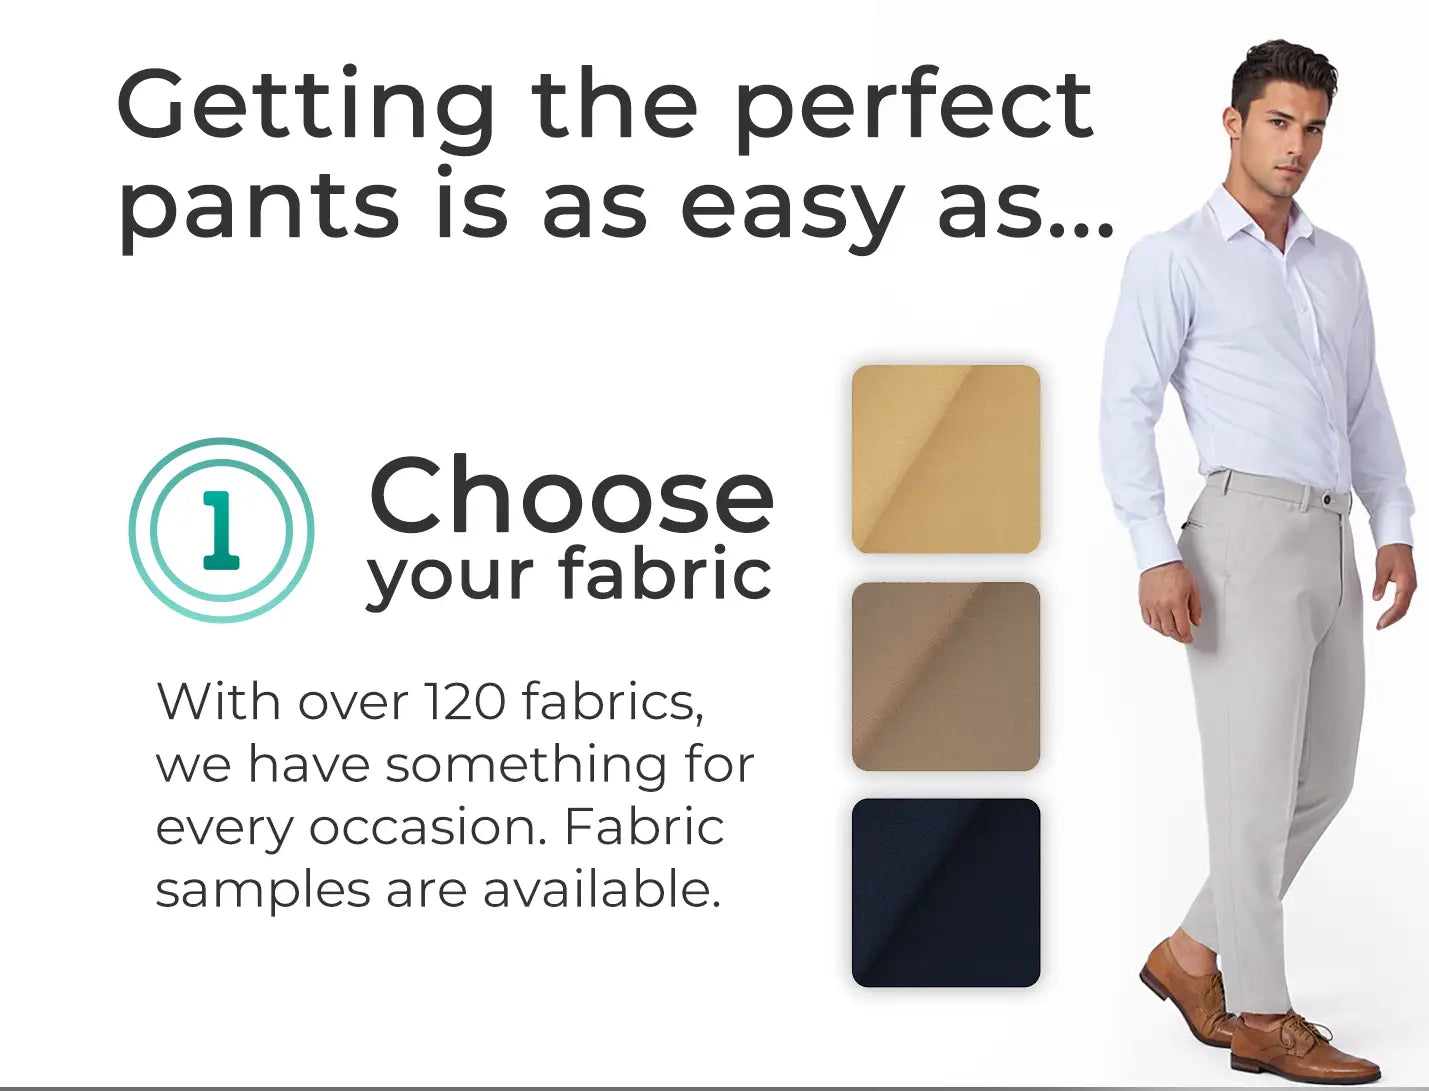 Getting the perfect pants is as easy as... step 1 - choose your fabric from over 120 in our collection.